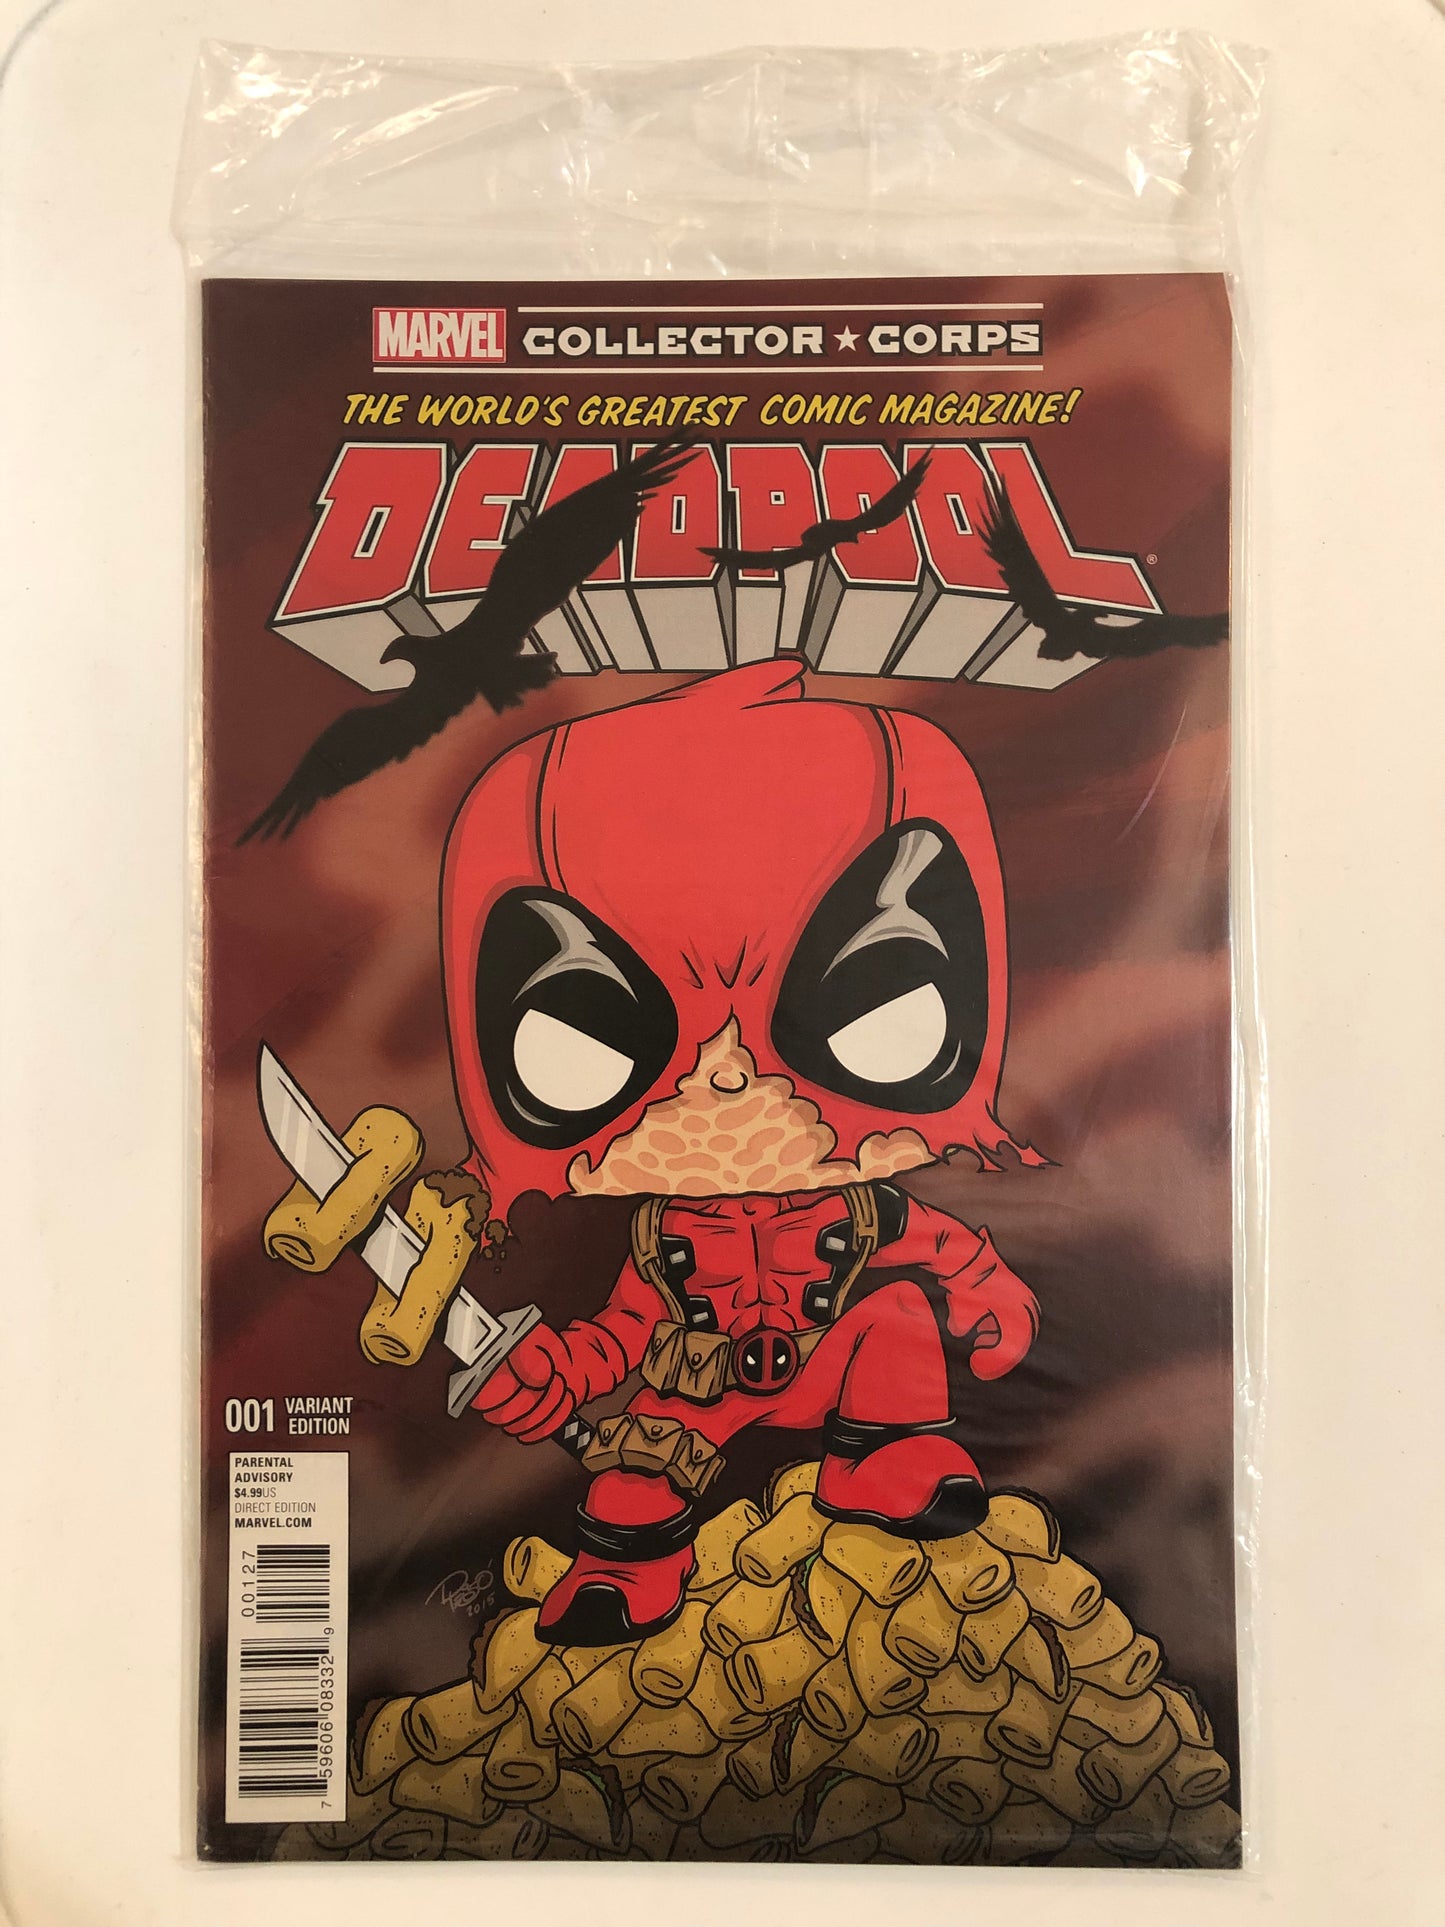 Deadpool #1 Collector Corps Variant